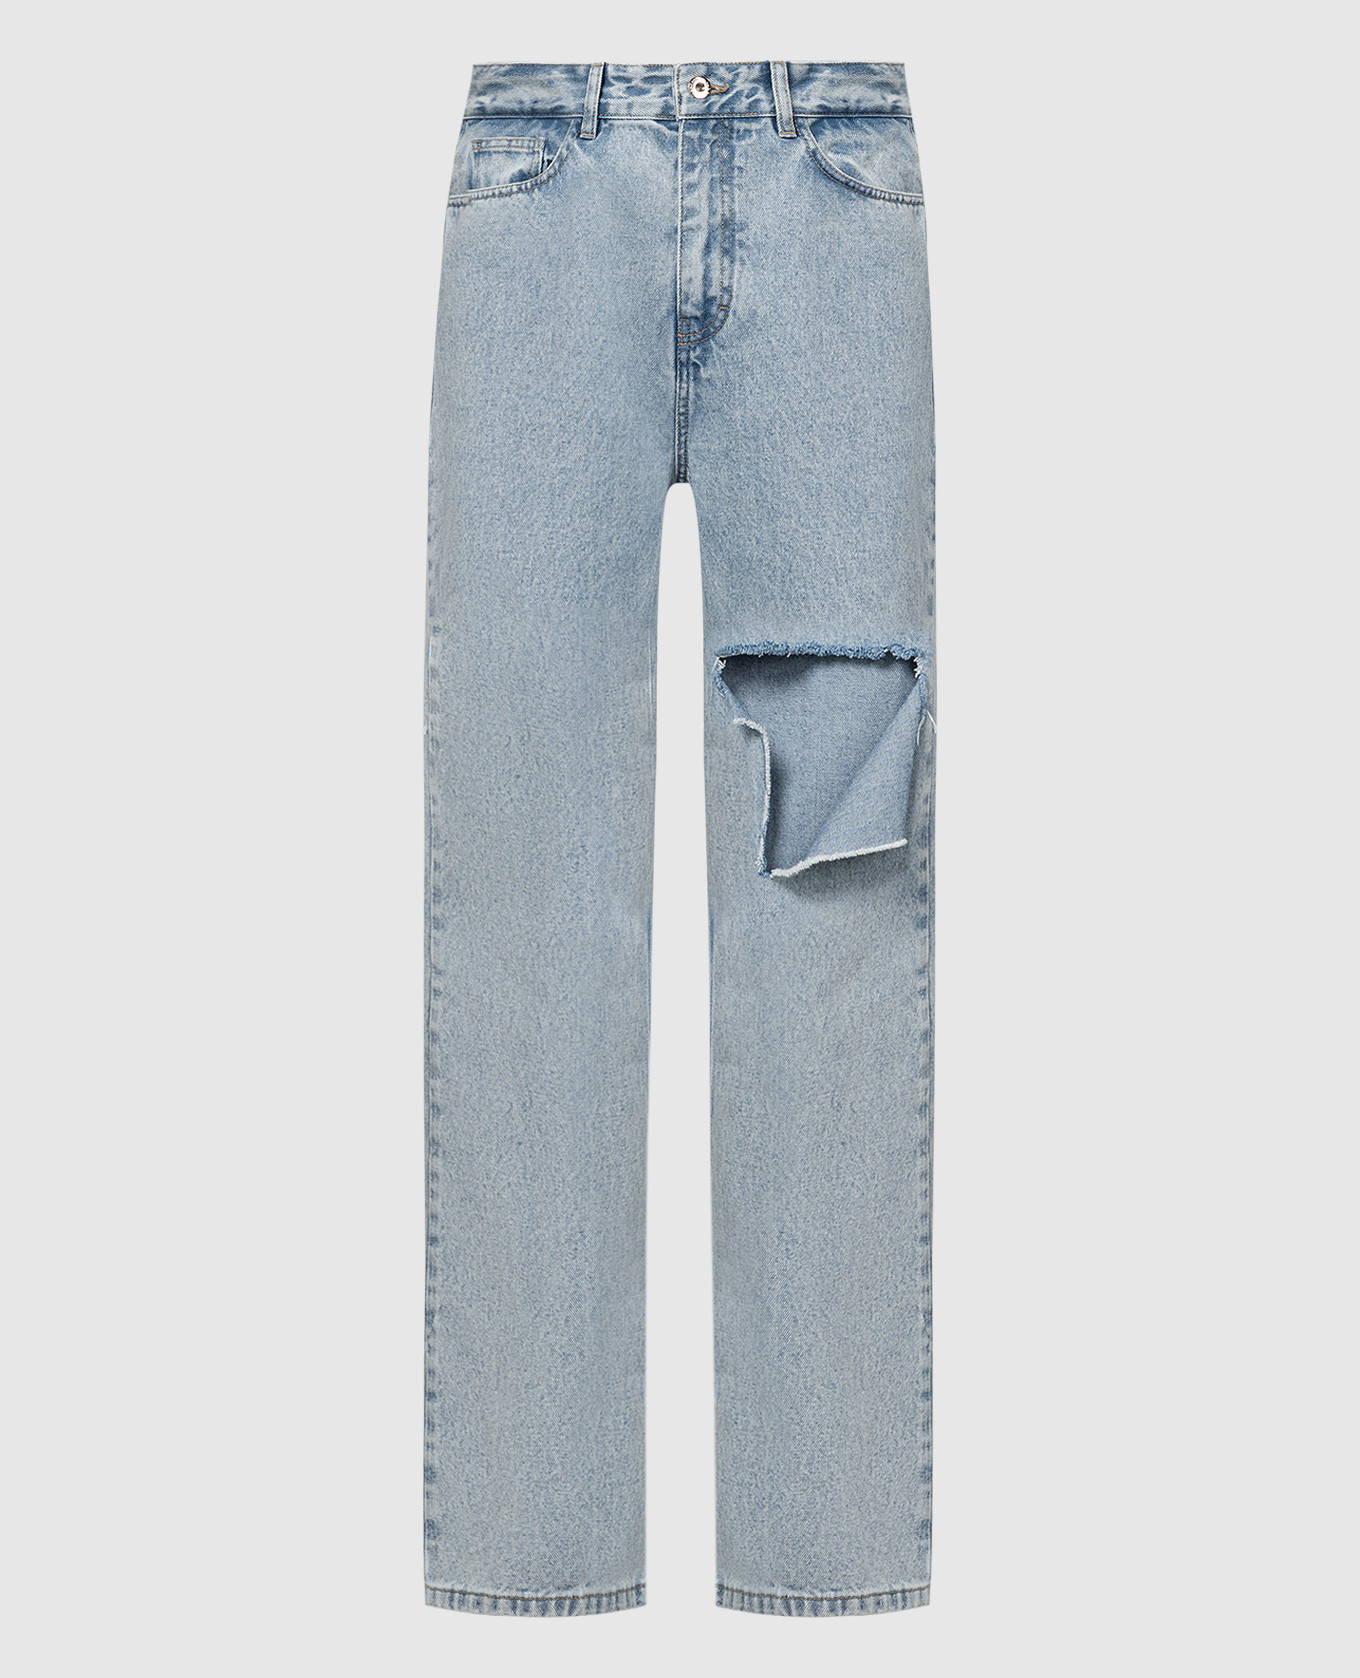 Blue jeans with a cutout